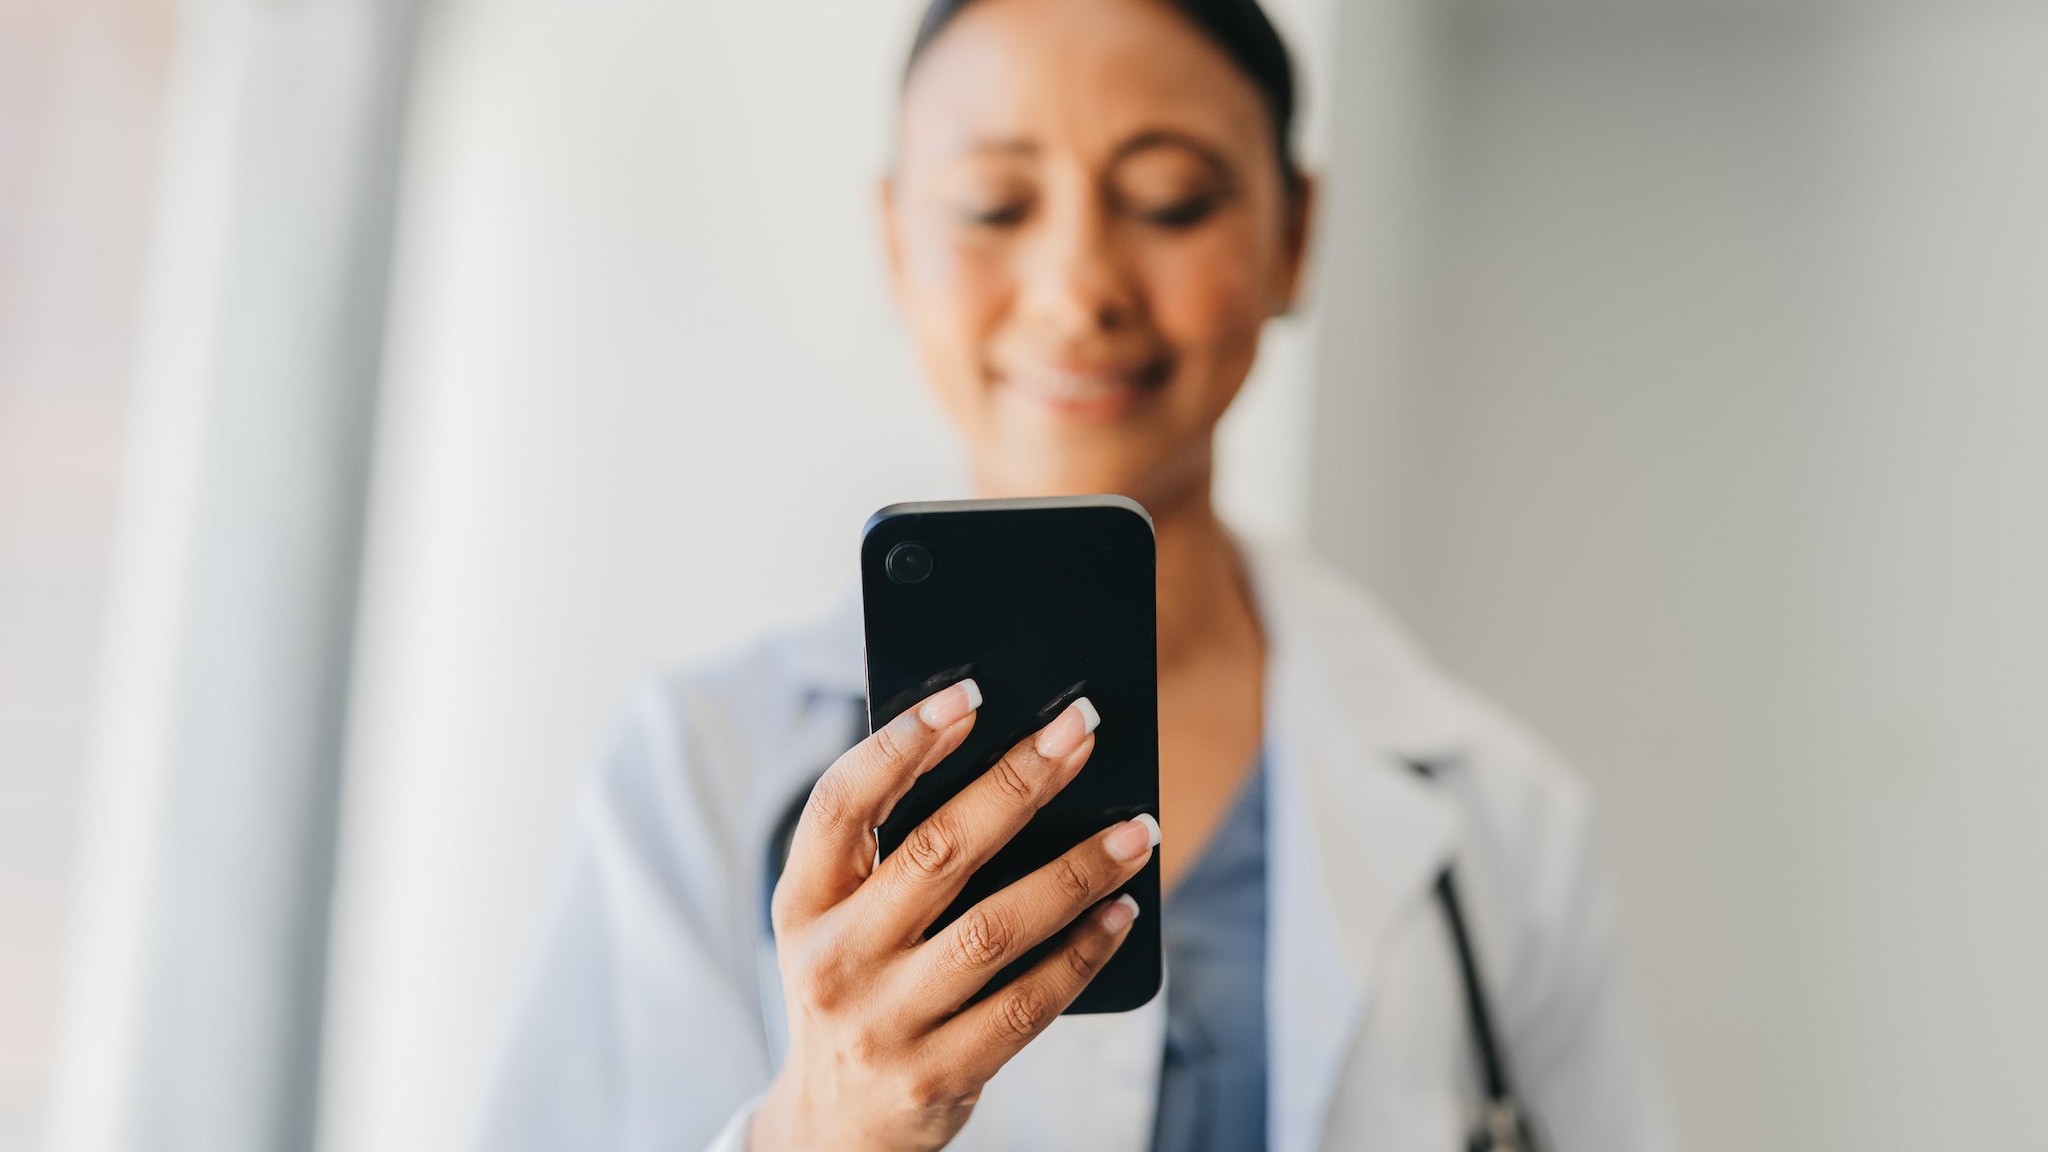 A health care provider following up with a patient by phone